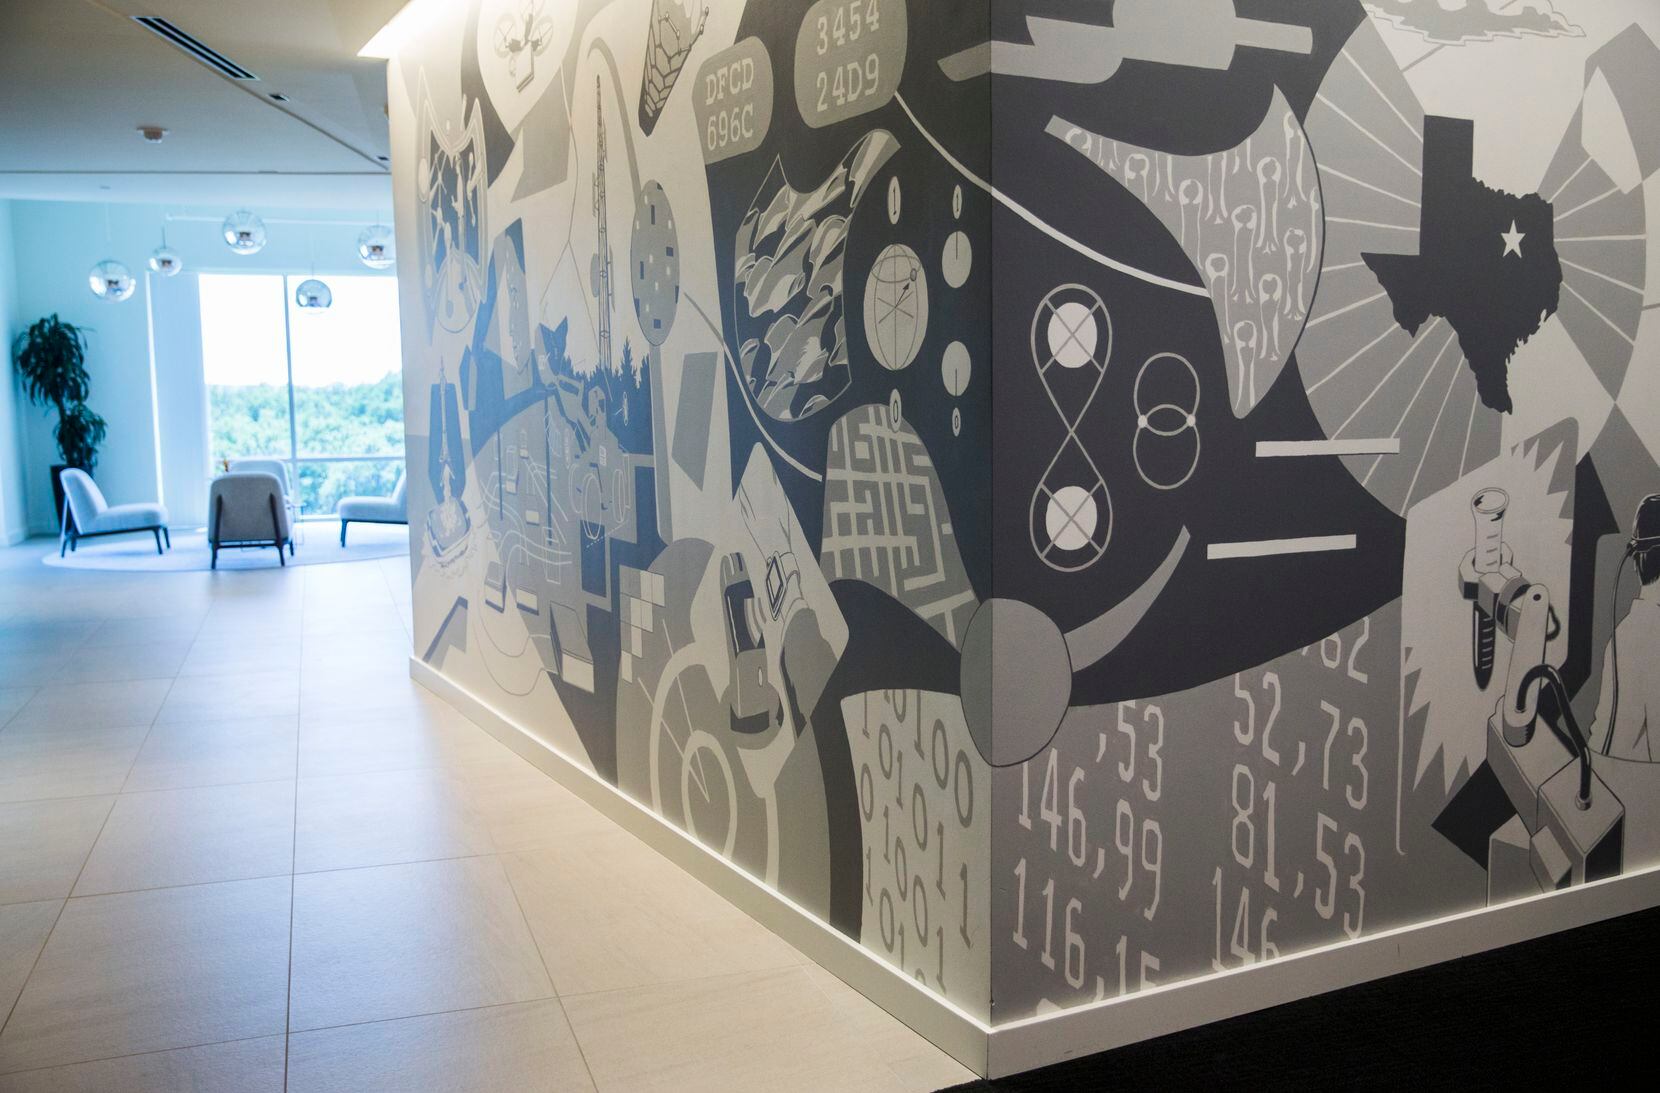 Wipro, an India IT company with 1,200 employees in Texas, opened a digital innovation center in Plano in 2019. This is one of the center's common spaces with a custom mural.
